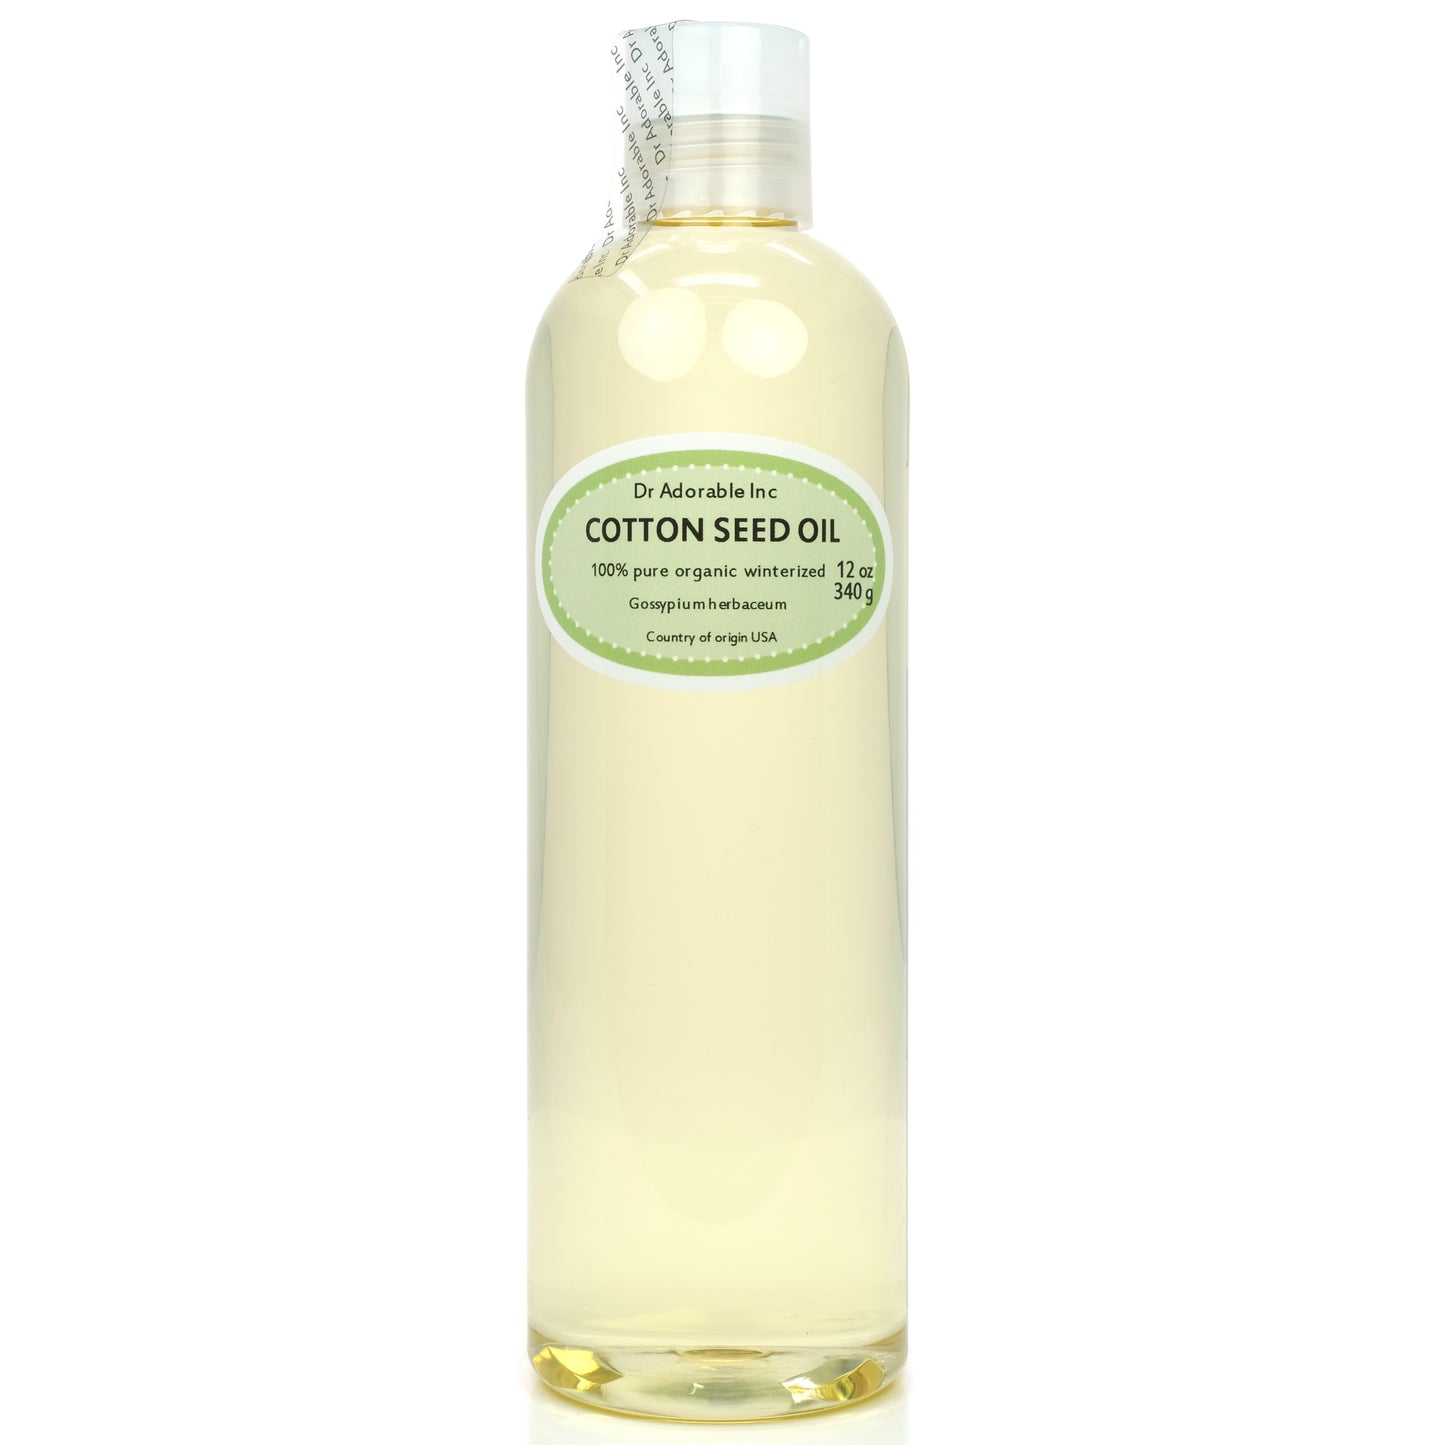 Cottonseed Oil - Winterized 100% Pure Natural Organic Cold Pressed